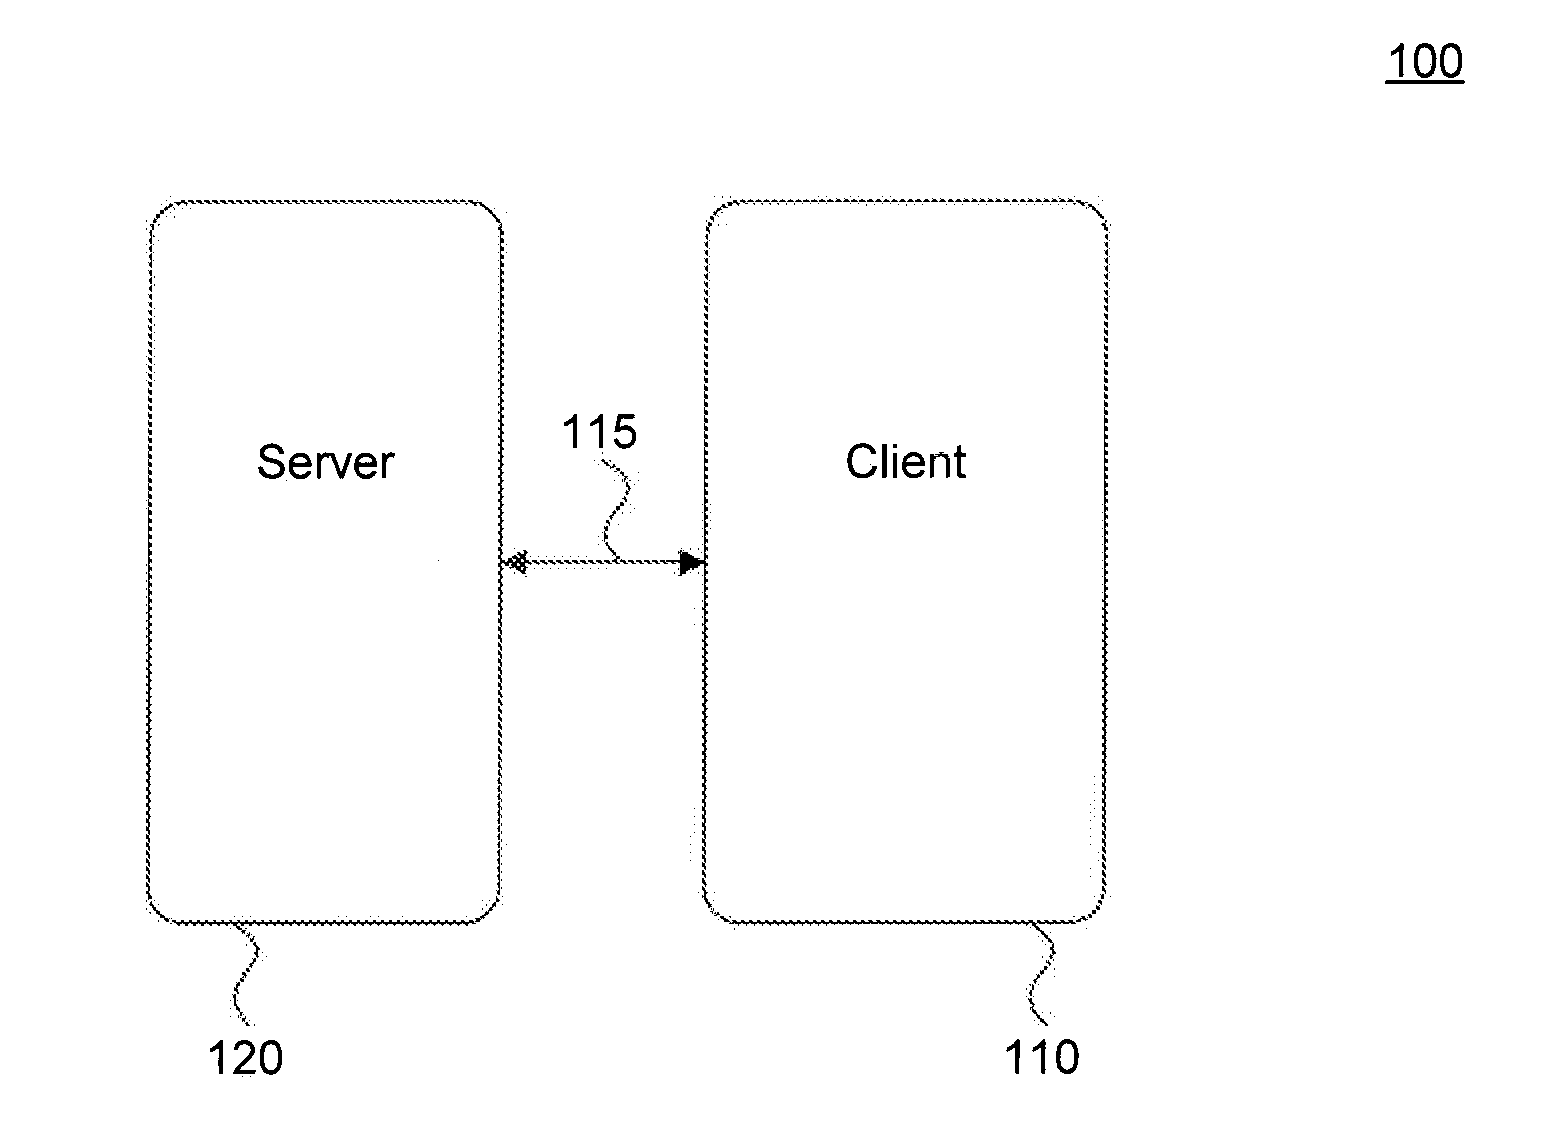 Method and System for Data Exchange and Exception Handling in a Data Processing Environment